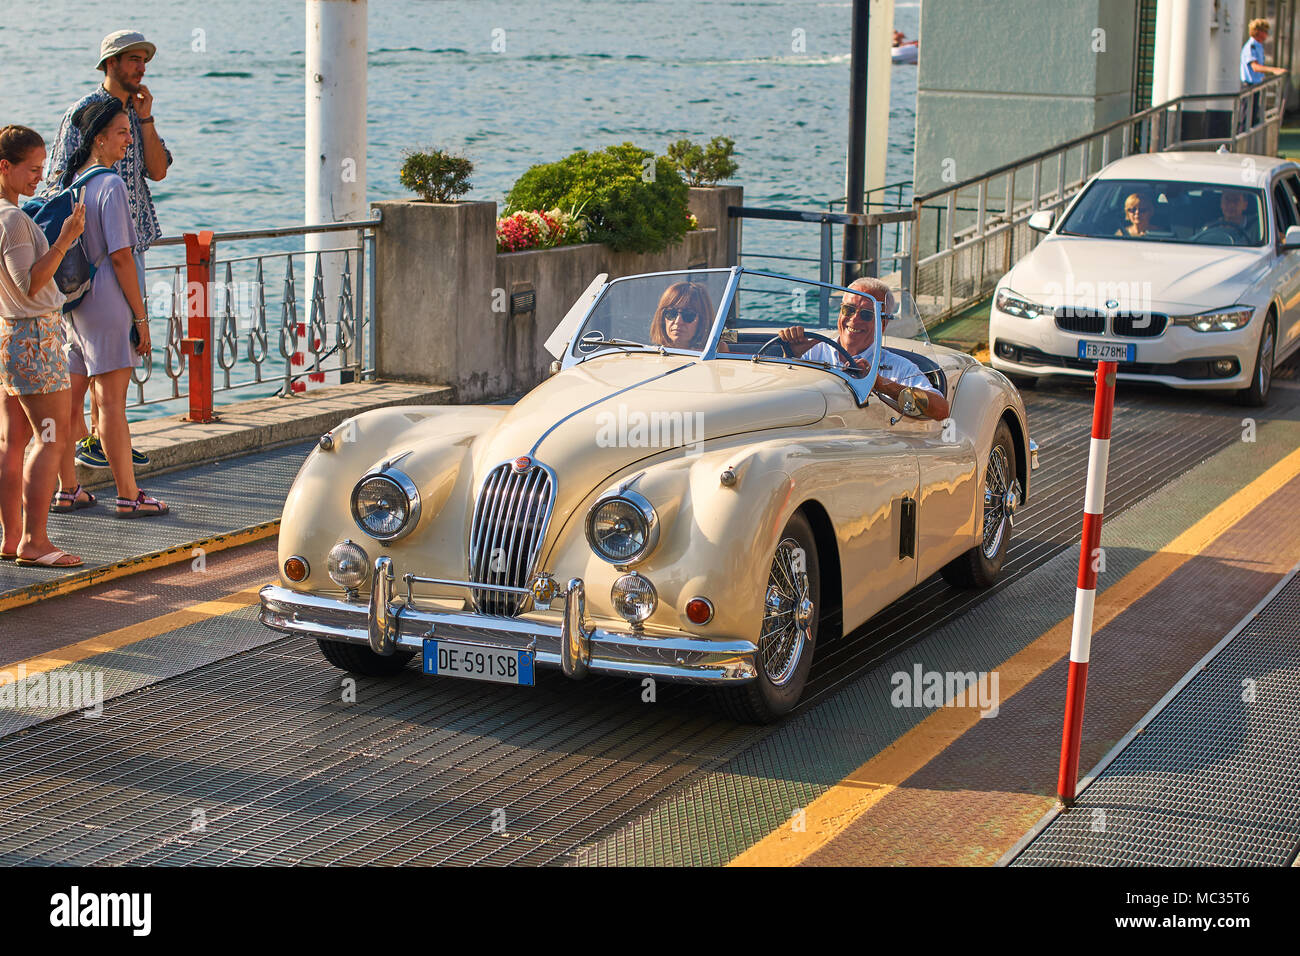 Happy man drives out his vintage beige Jaguar XK120, a sports car manufactured by Jaguar circa 1950, from the ferry boat at lake Como Stock Photo